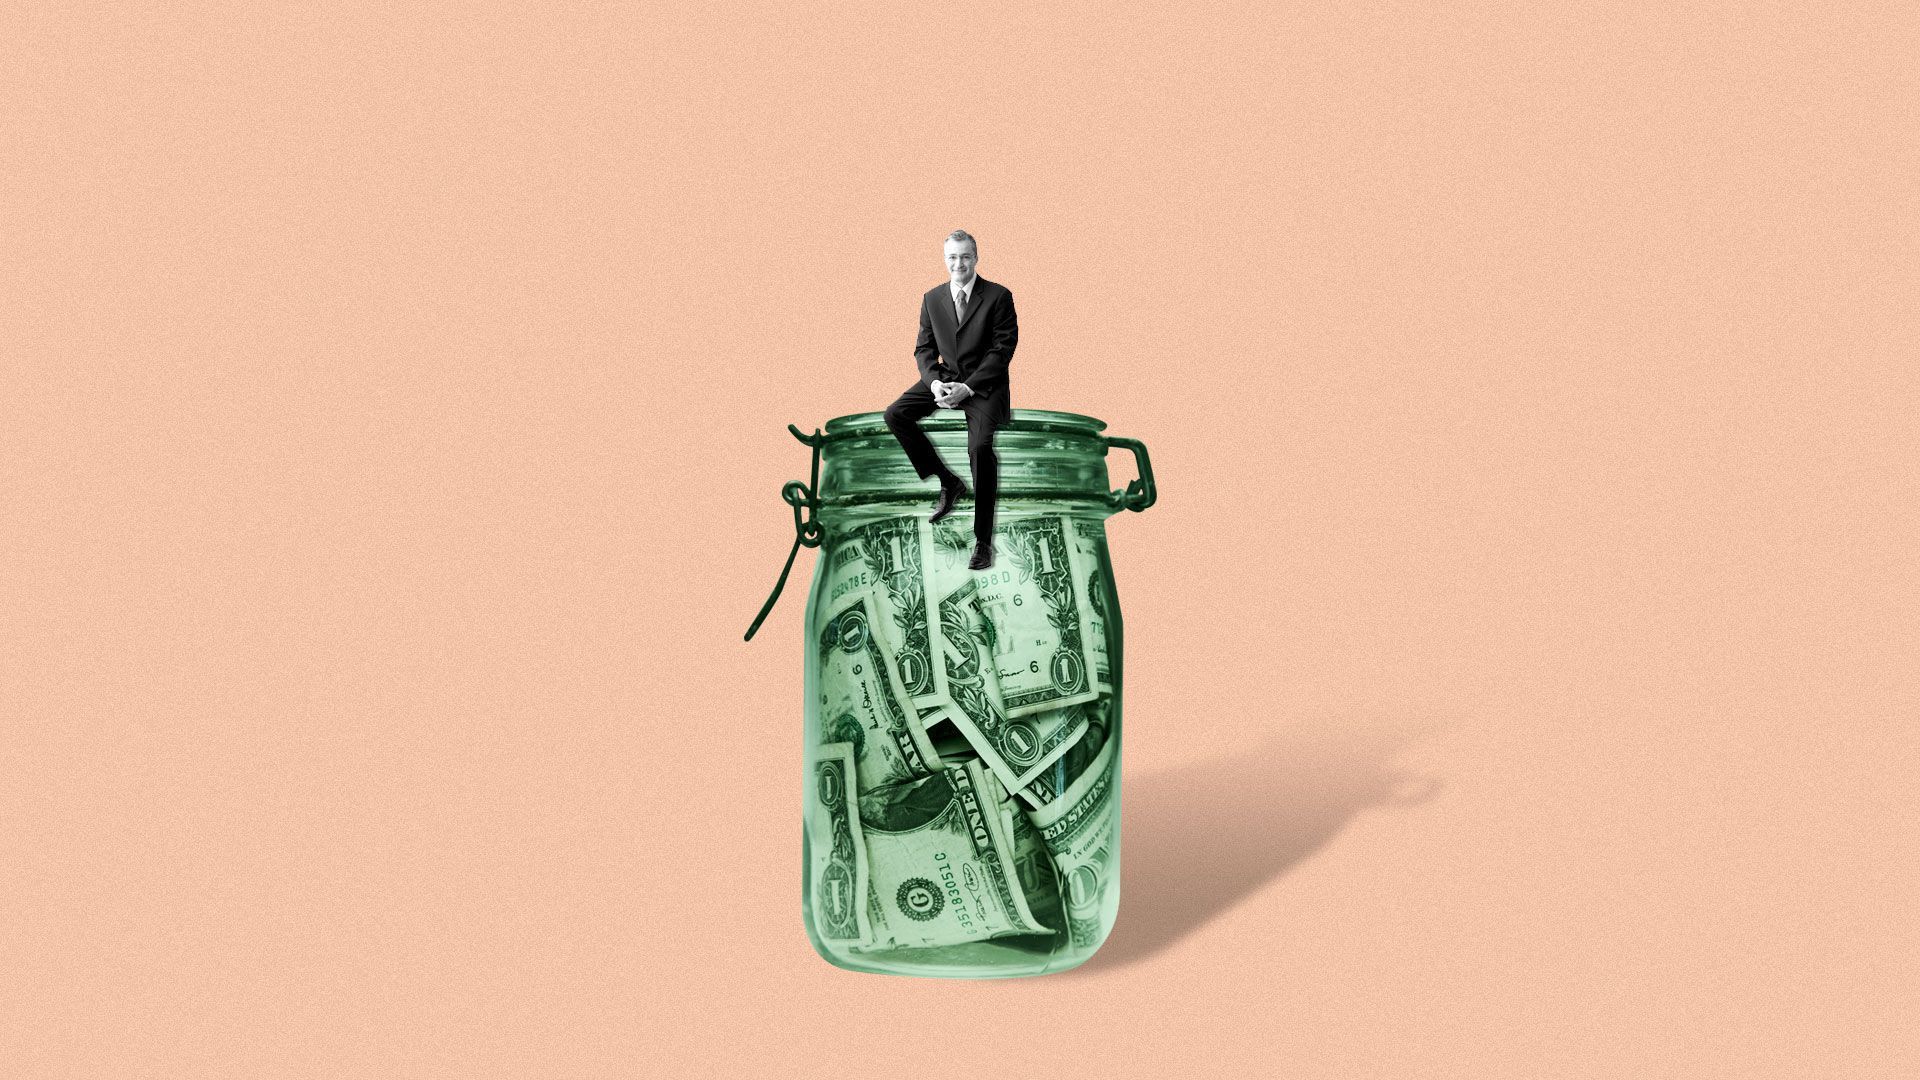 An illustration of a man sitting on a jar of money.